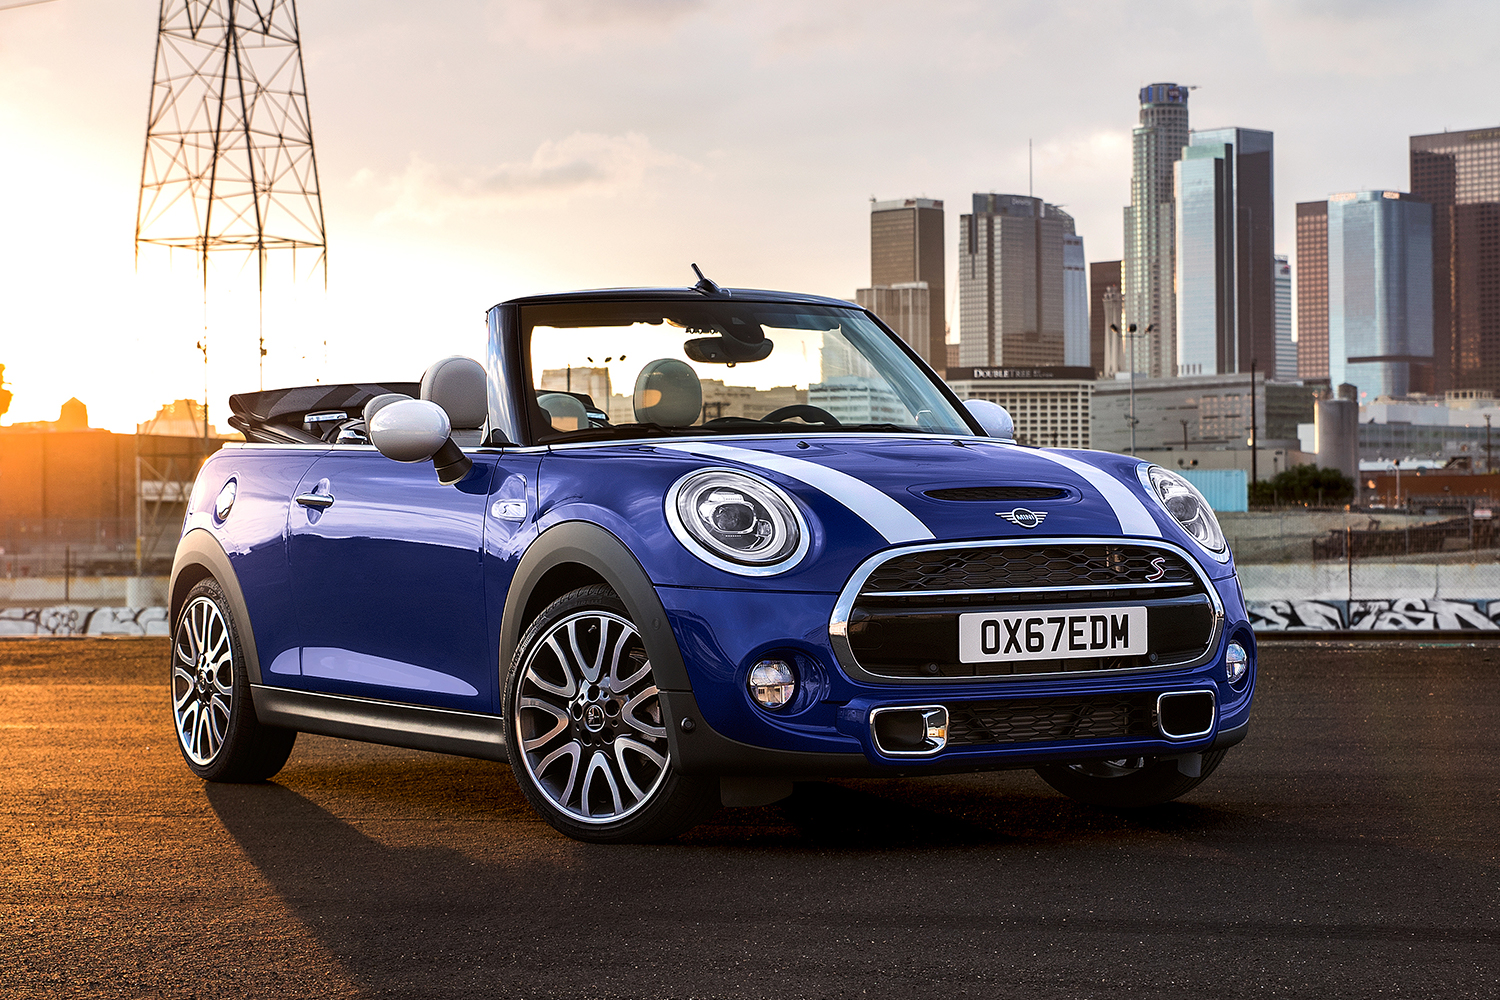 2020 Mini Convertible in blue and white